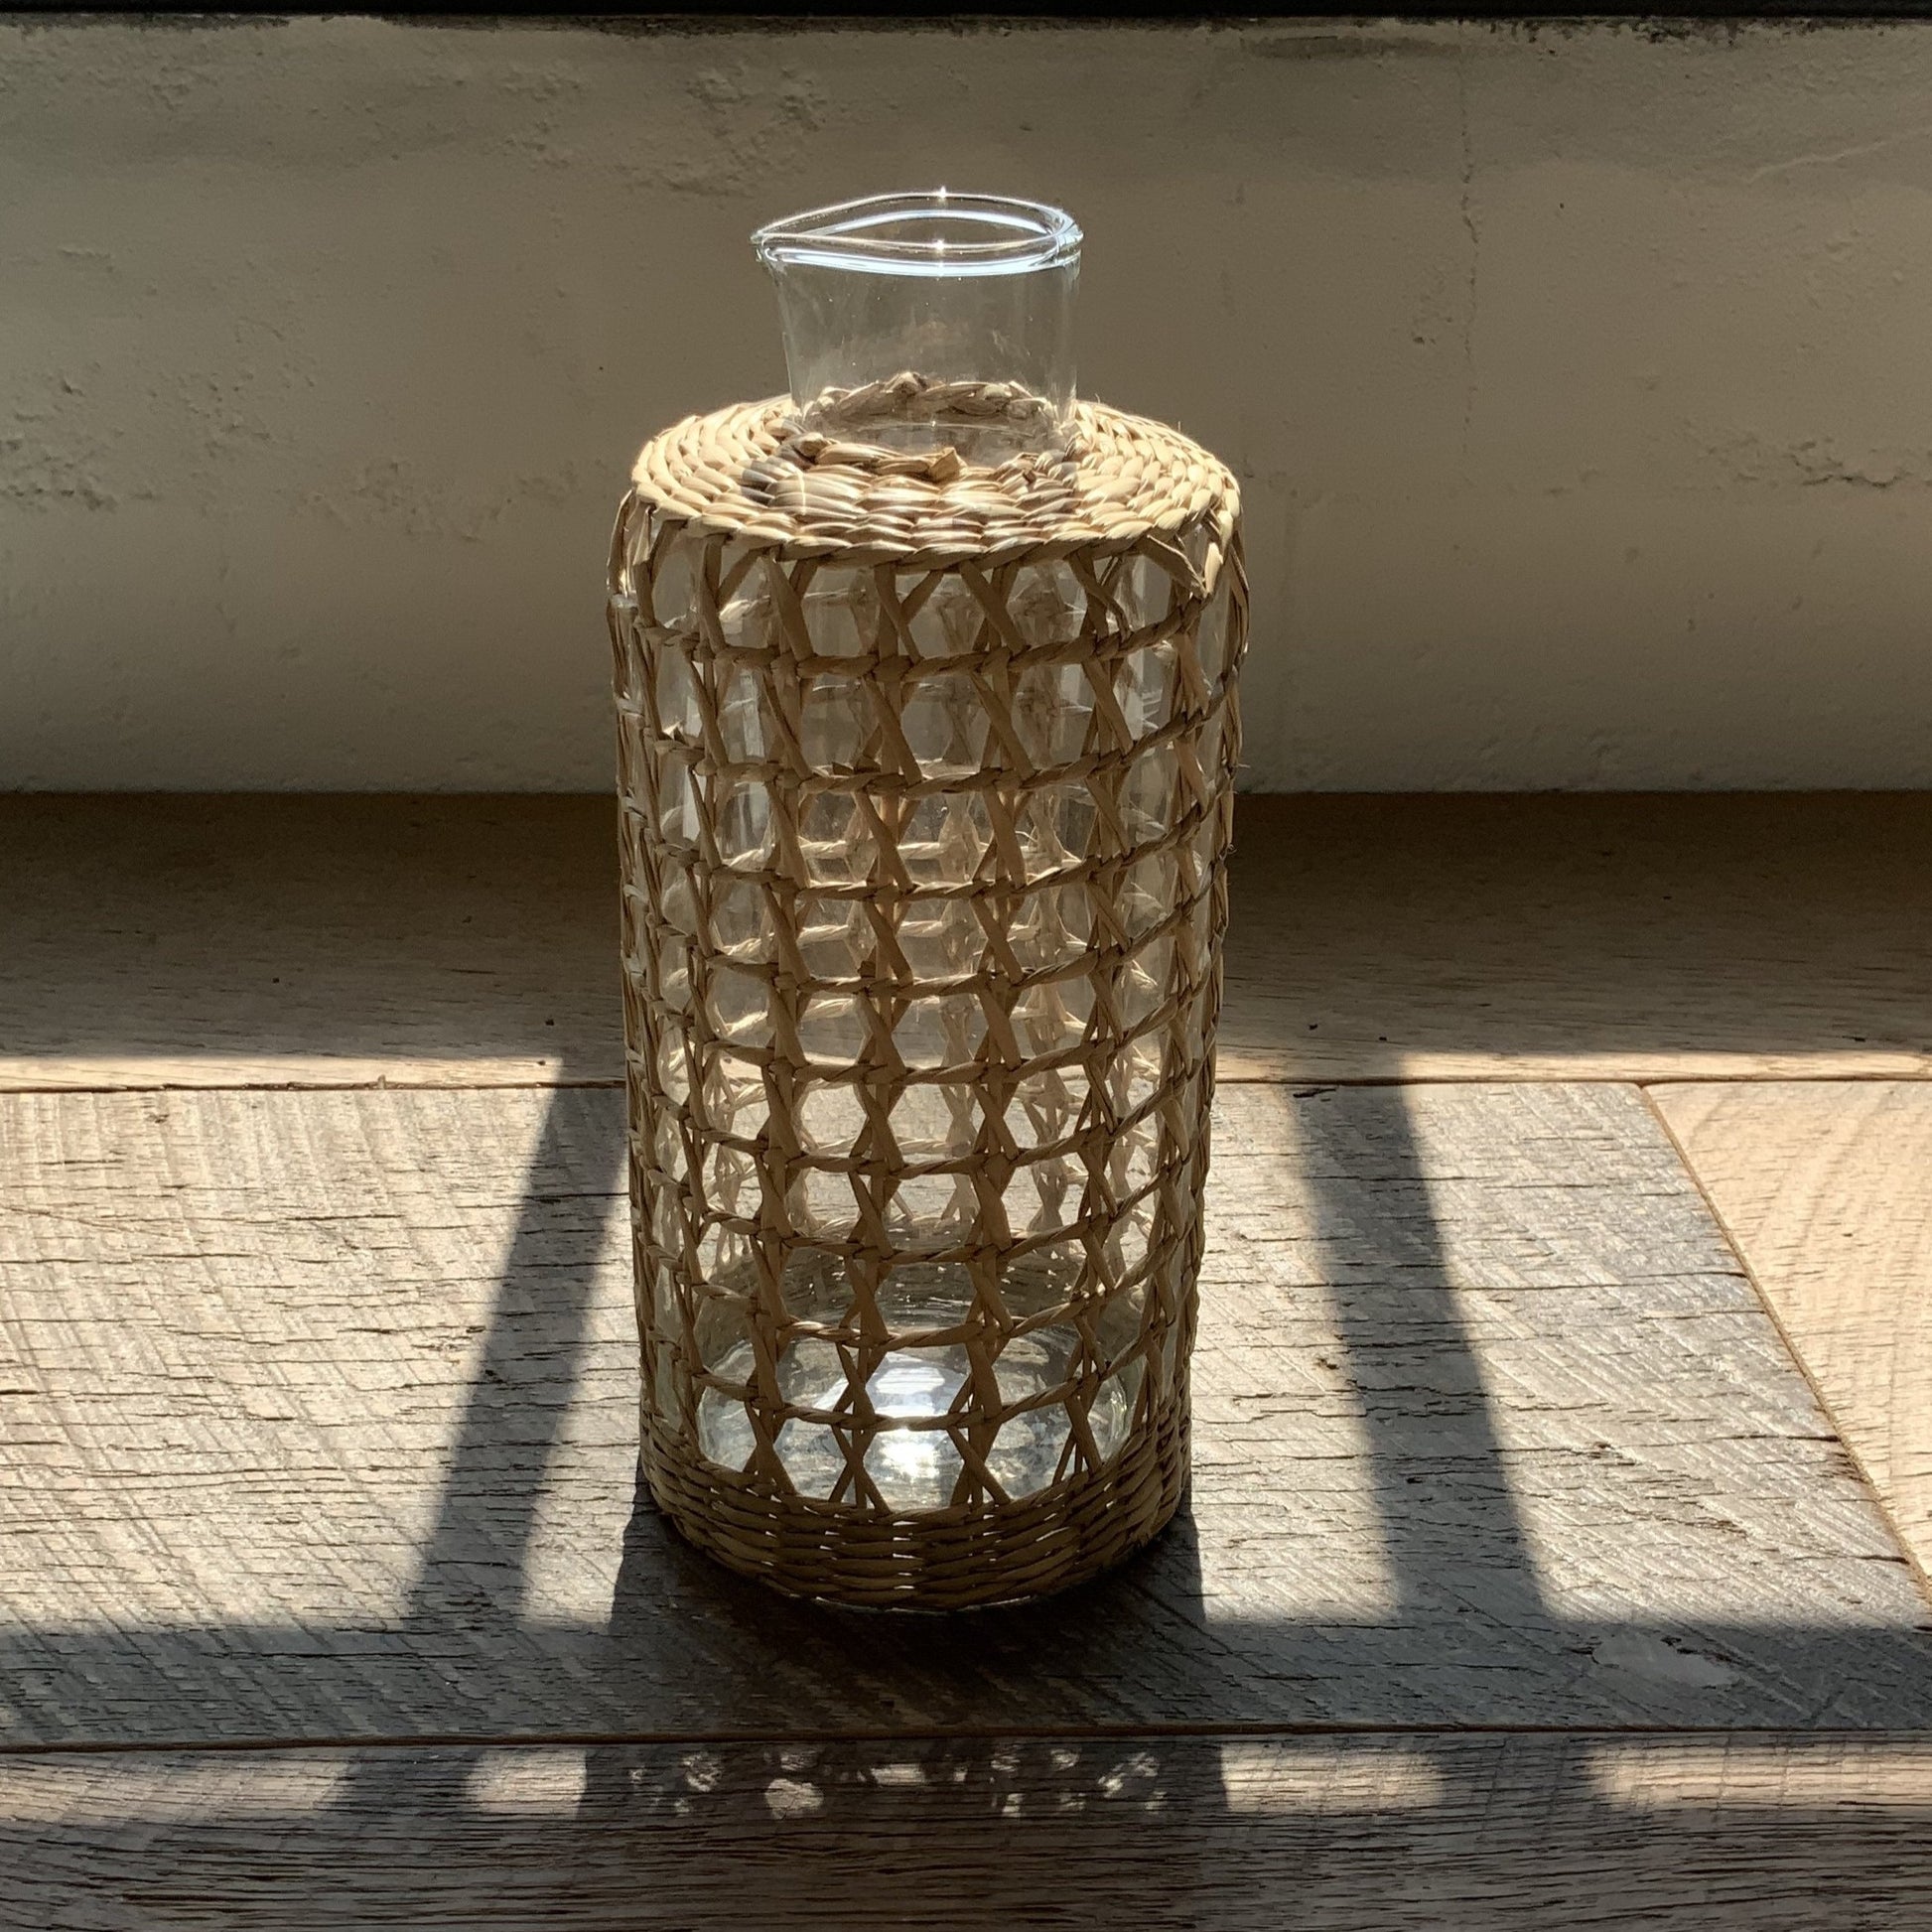 Seagrass Cage Carafe